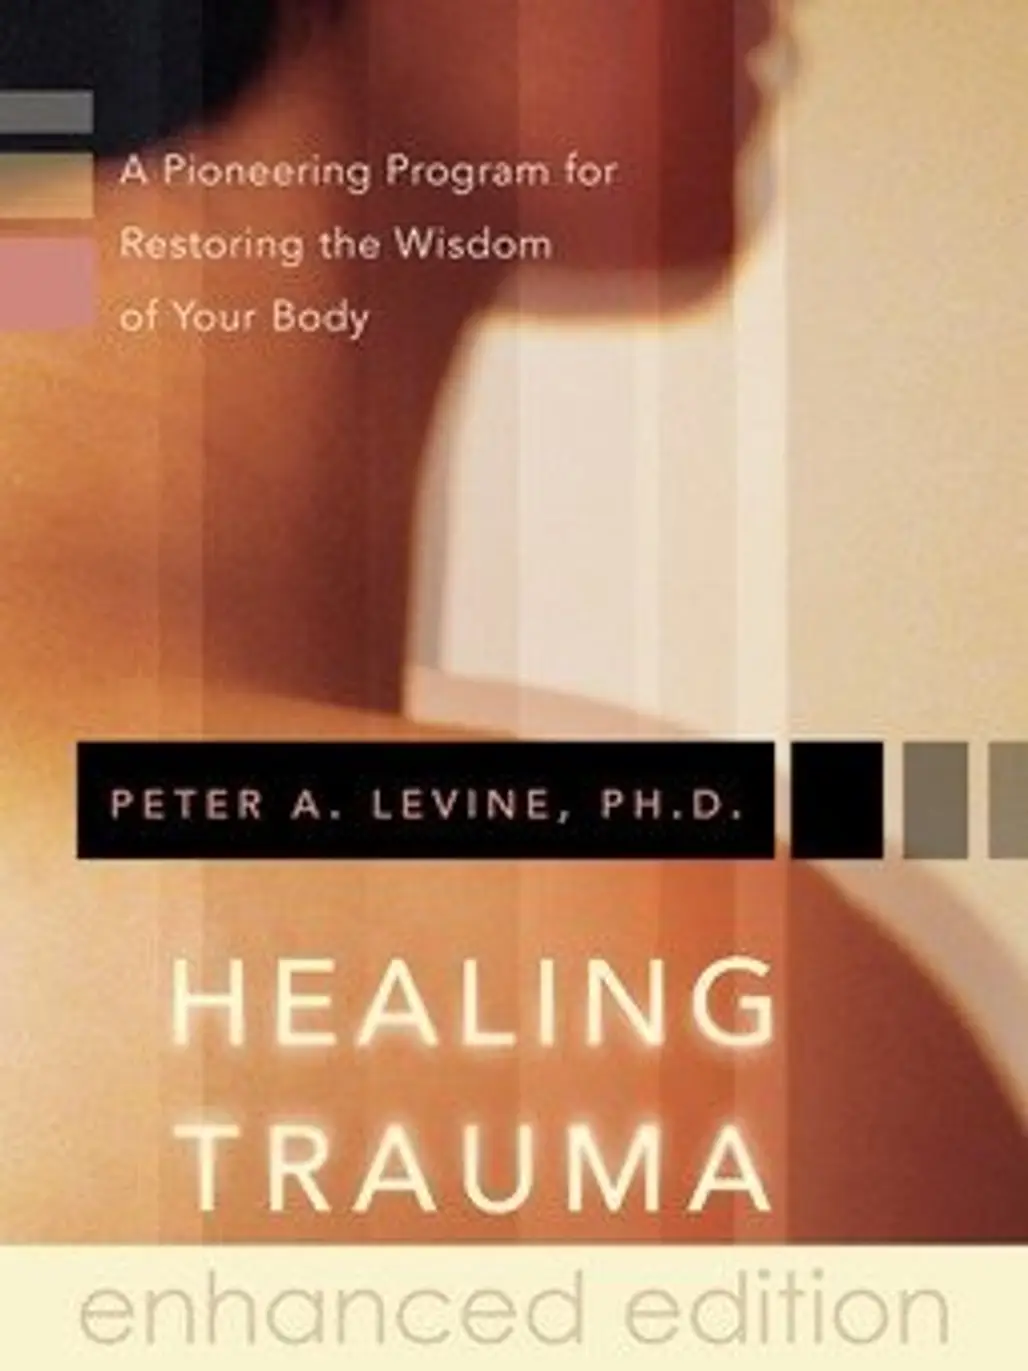 Healing Trauma: a Pioneering Program for Restoring the Wisdom of Your Body - by Peter a. Levine